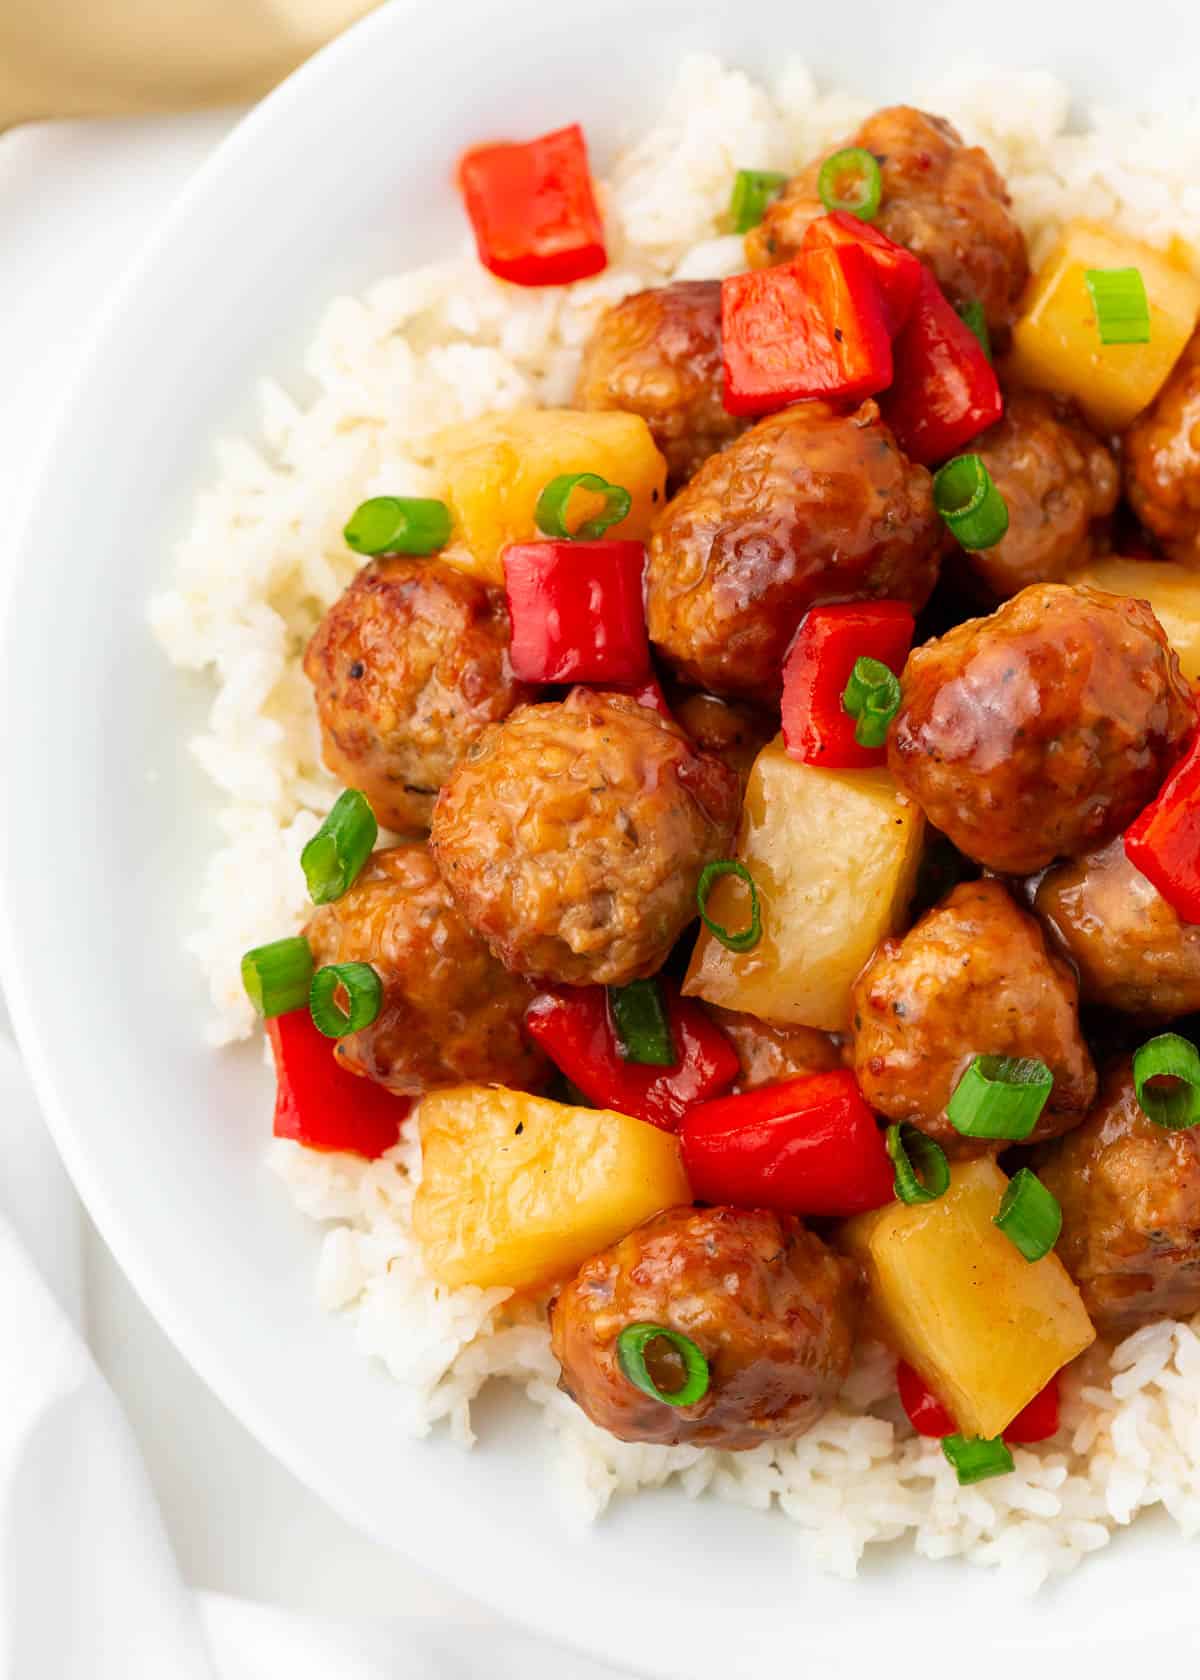 Sweet and sour meatballs and pineapple and rice in a bowl.